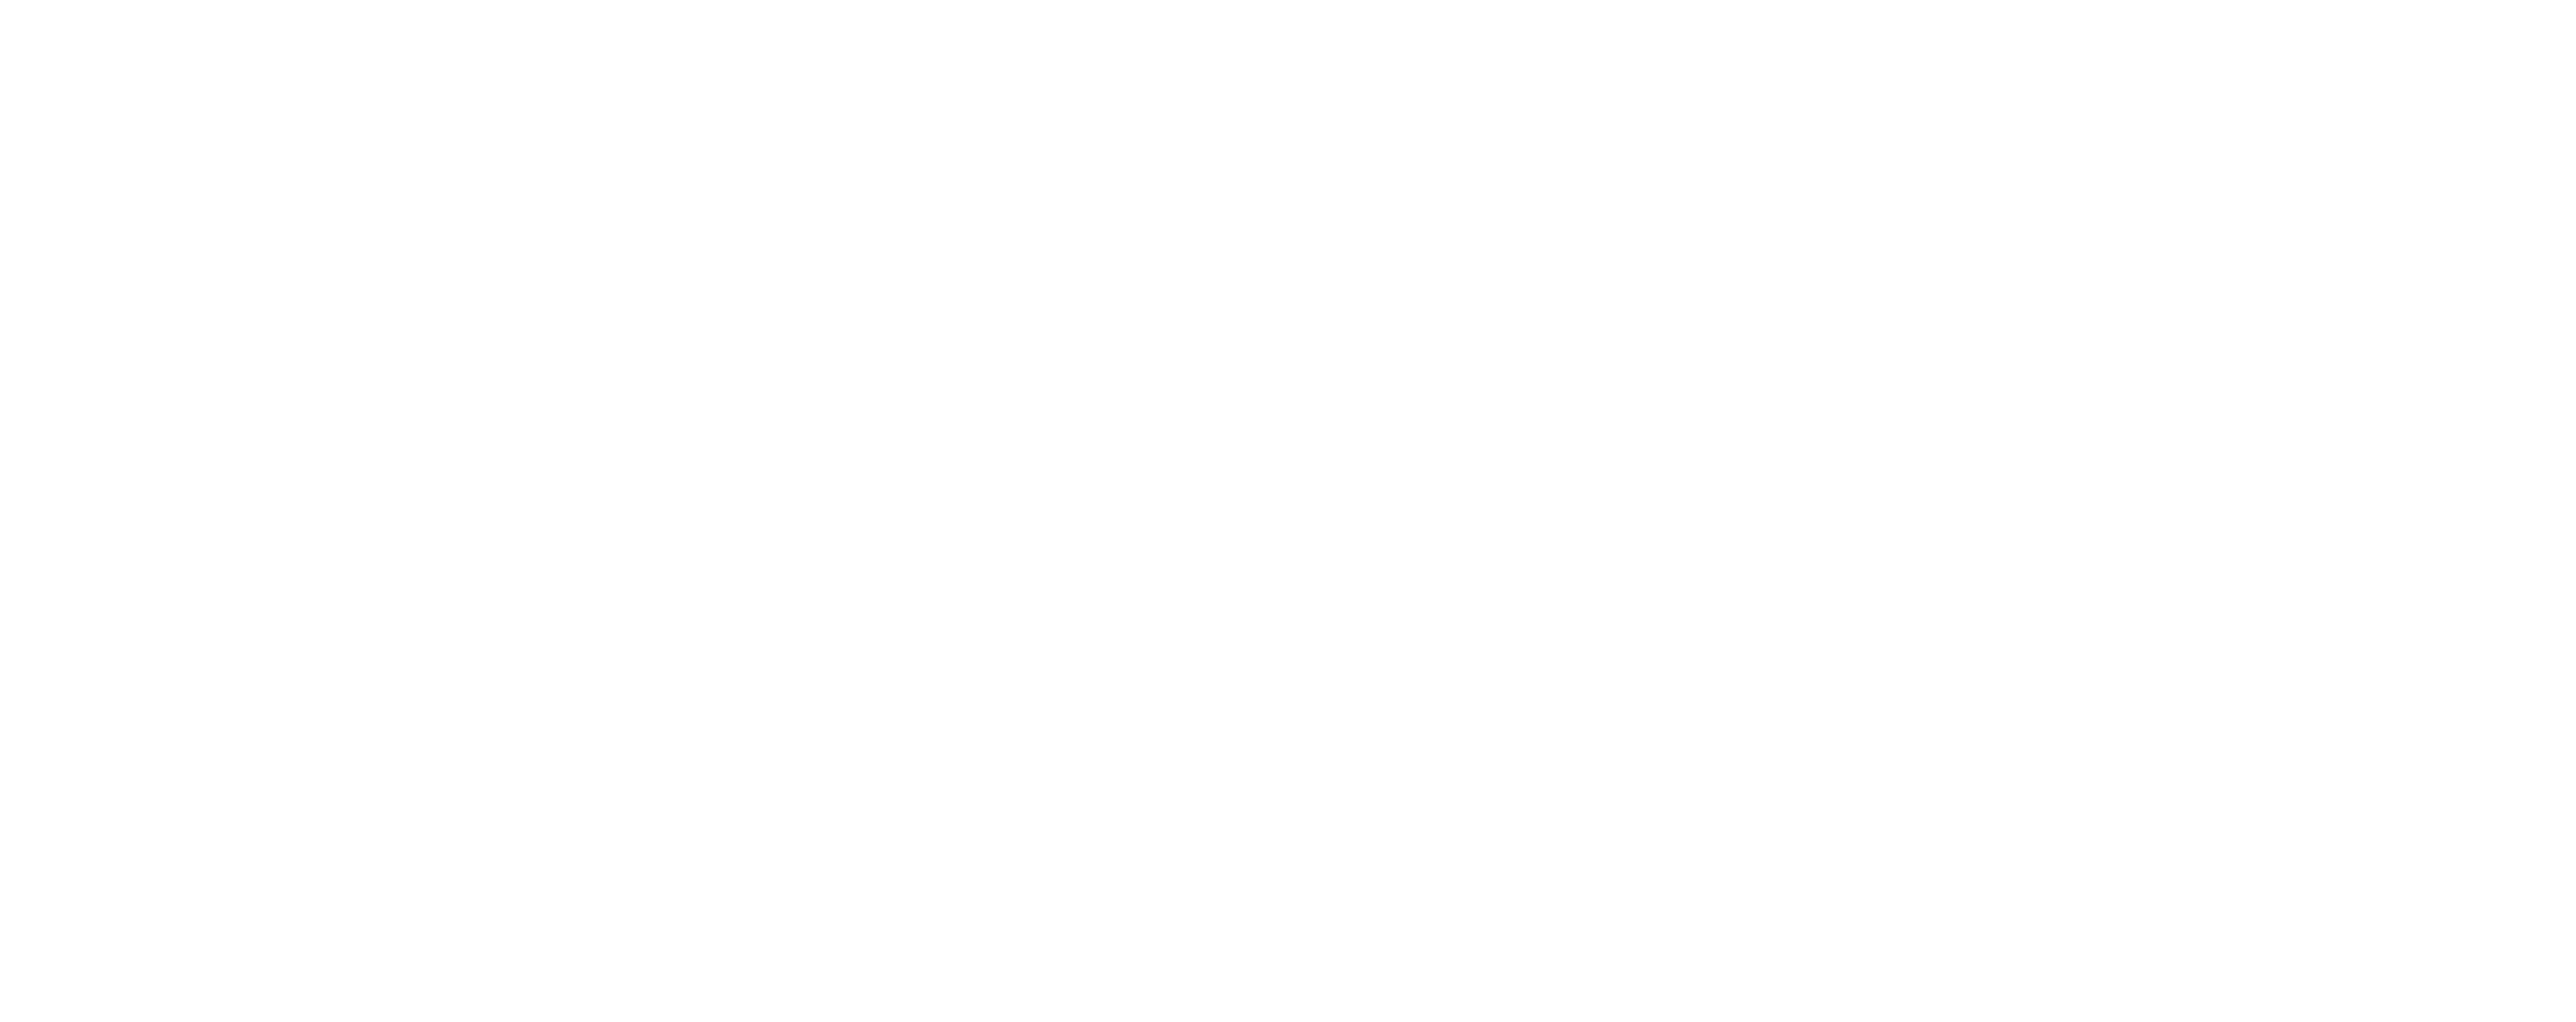 Instant System - Mobilty as a Service